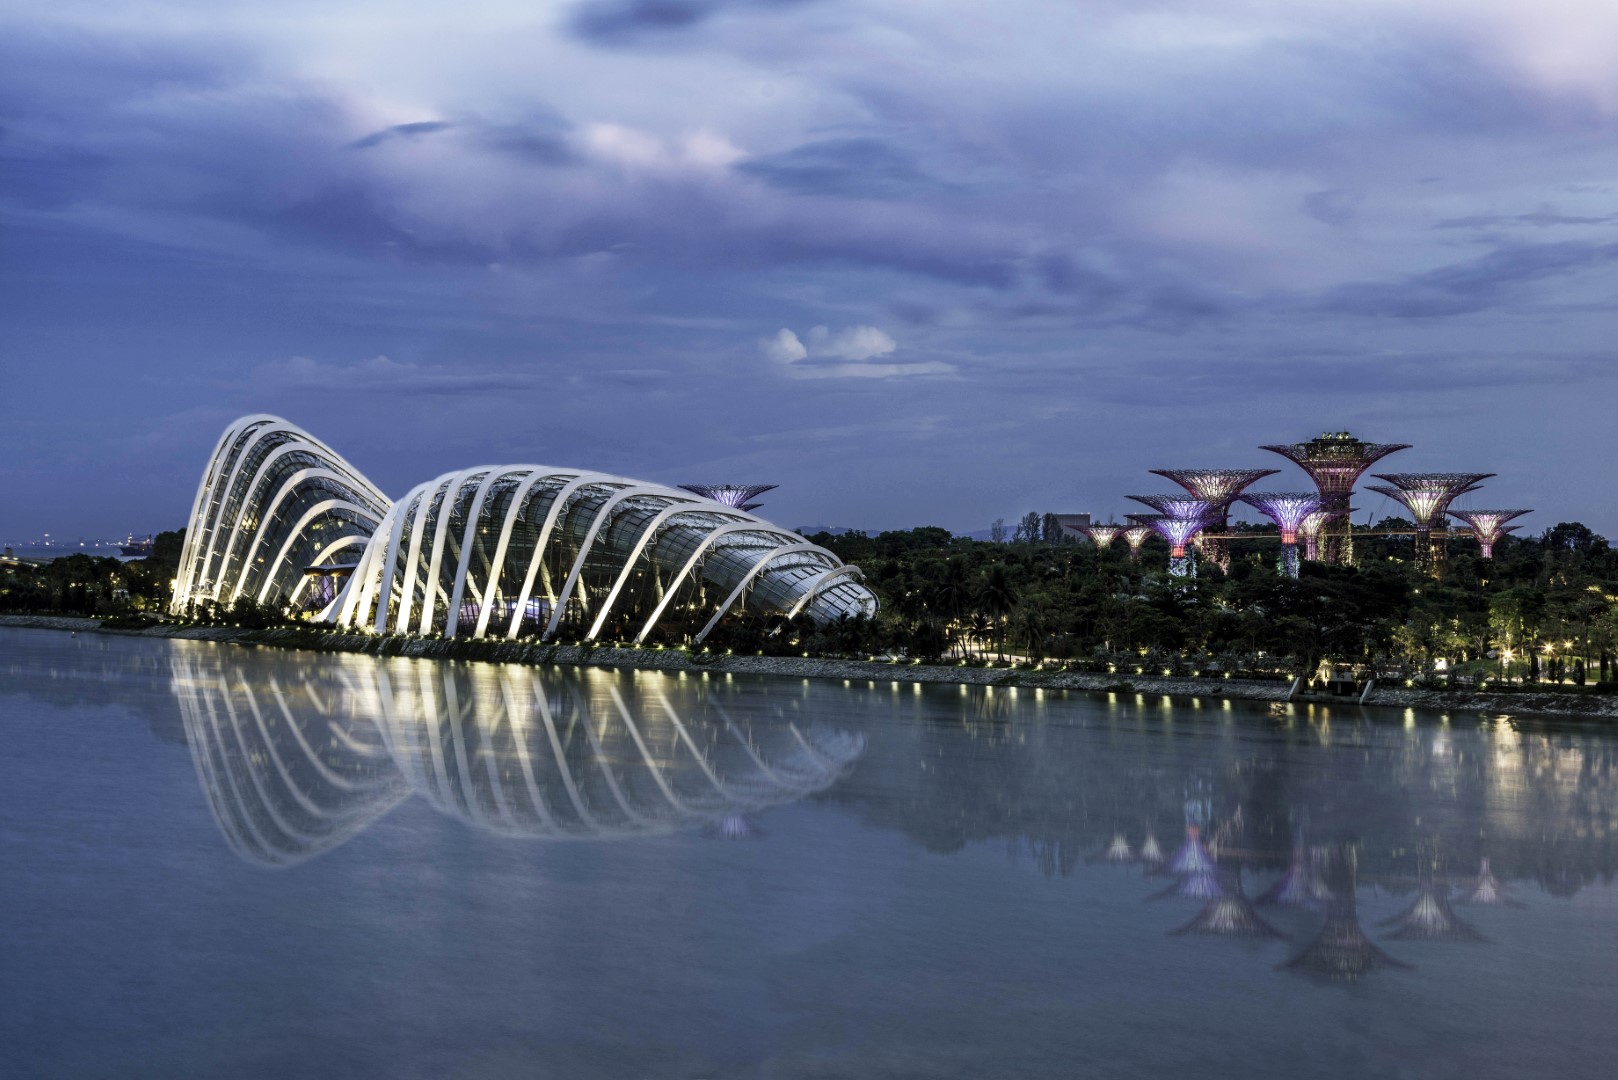 Gardens by the Bay Singapore is an iconic world-class attraction